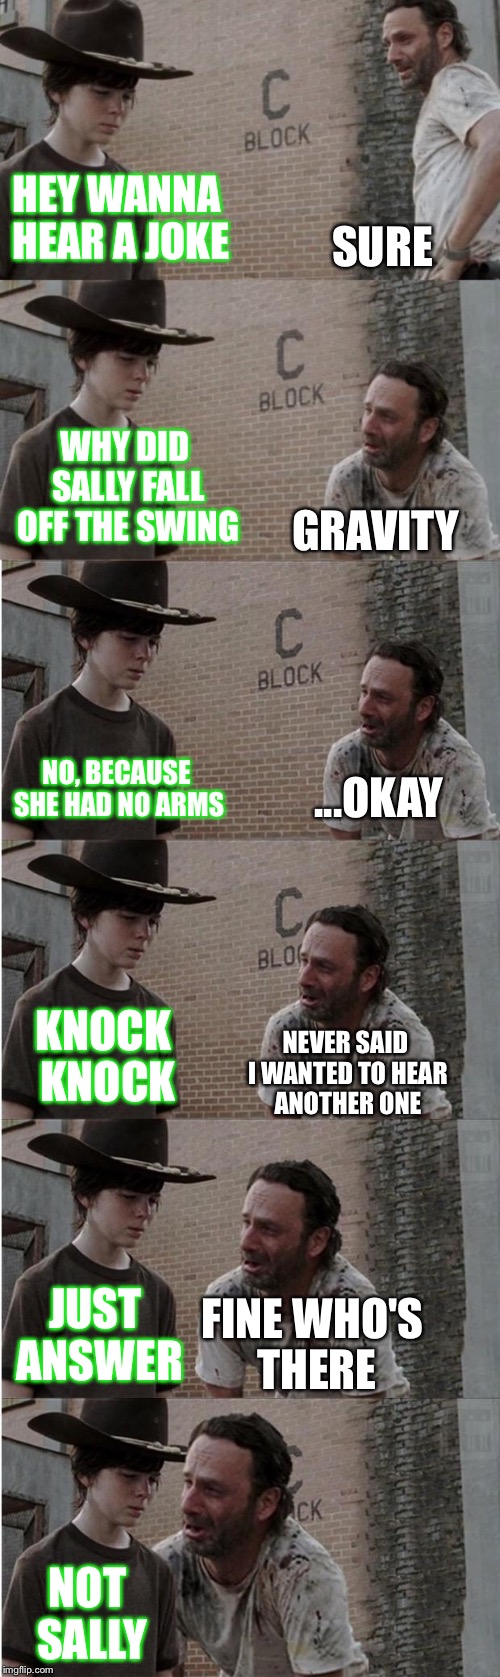 Rick and Carl Longer | HEY WANNA HEAR A JOKE; SURE; WHY DID SALLY FALL OFF THE SWING; GRAVITY; NO, BECAUSE SHE HAD NO ARMS; ...OKAY; KNOCK KNOCK; NEVER SAID I WANTED TO HEAR ANOTHER ONE; JUST ANSWER; FINE WHO'S THERE; NOT SALLY | image tagged in memes,rick and carl longer | made w/ Imgflip meme maker